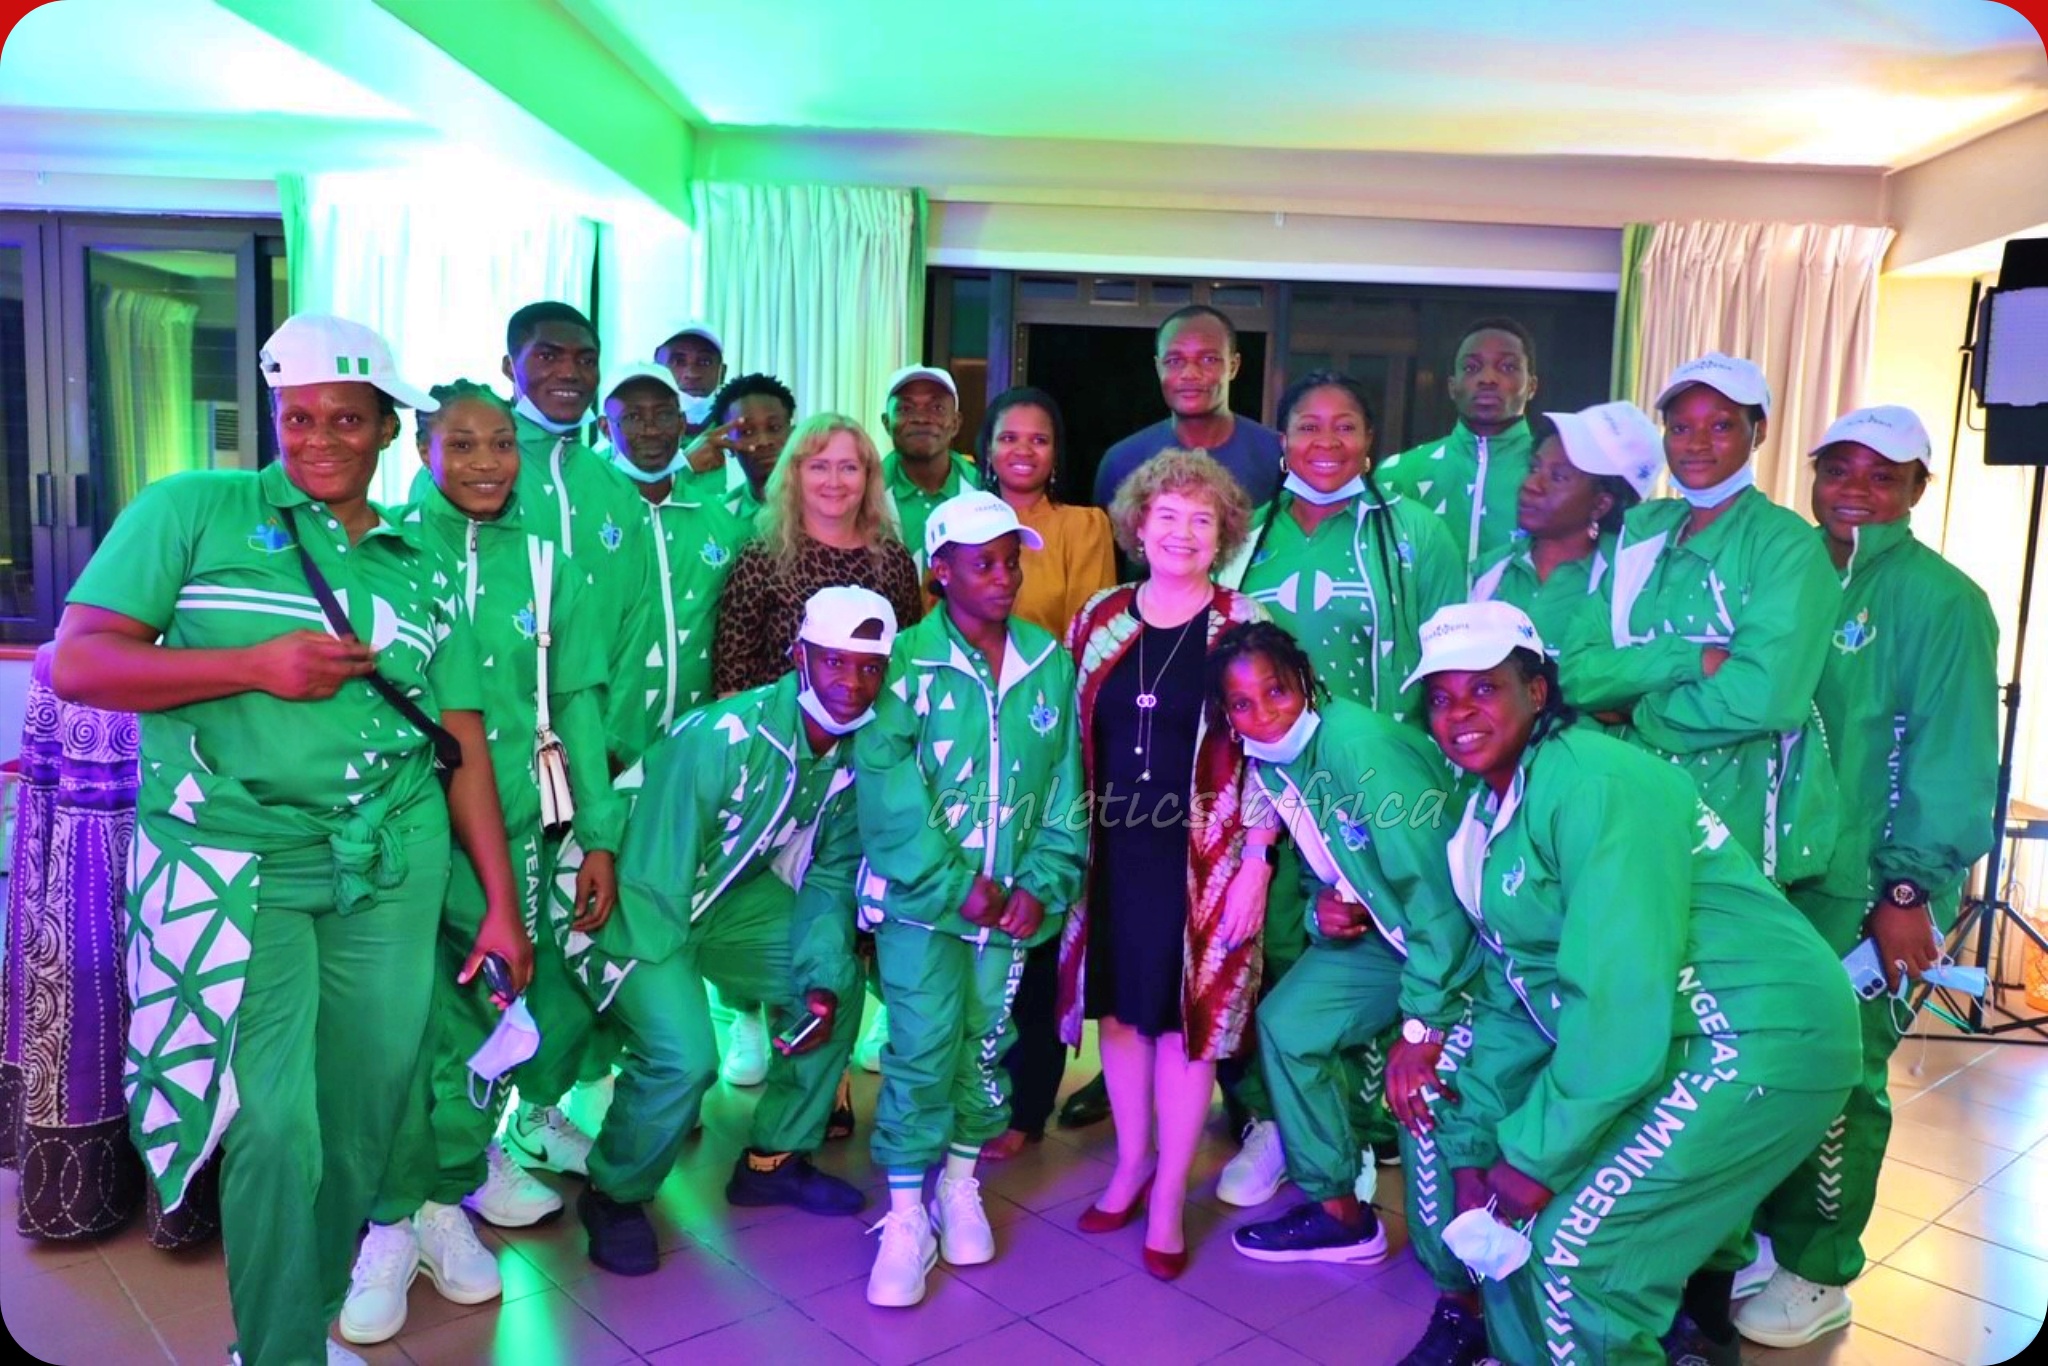 British High Commissioner, Catriona Laing, hosted a farewell reception for Birmingham Commonwealth Games bound Nigerian athletes, alongside the Minister of Sports and the President of the Nigerian Olympic Committee in Abuja.